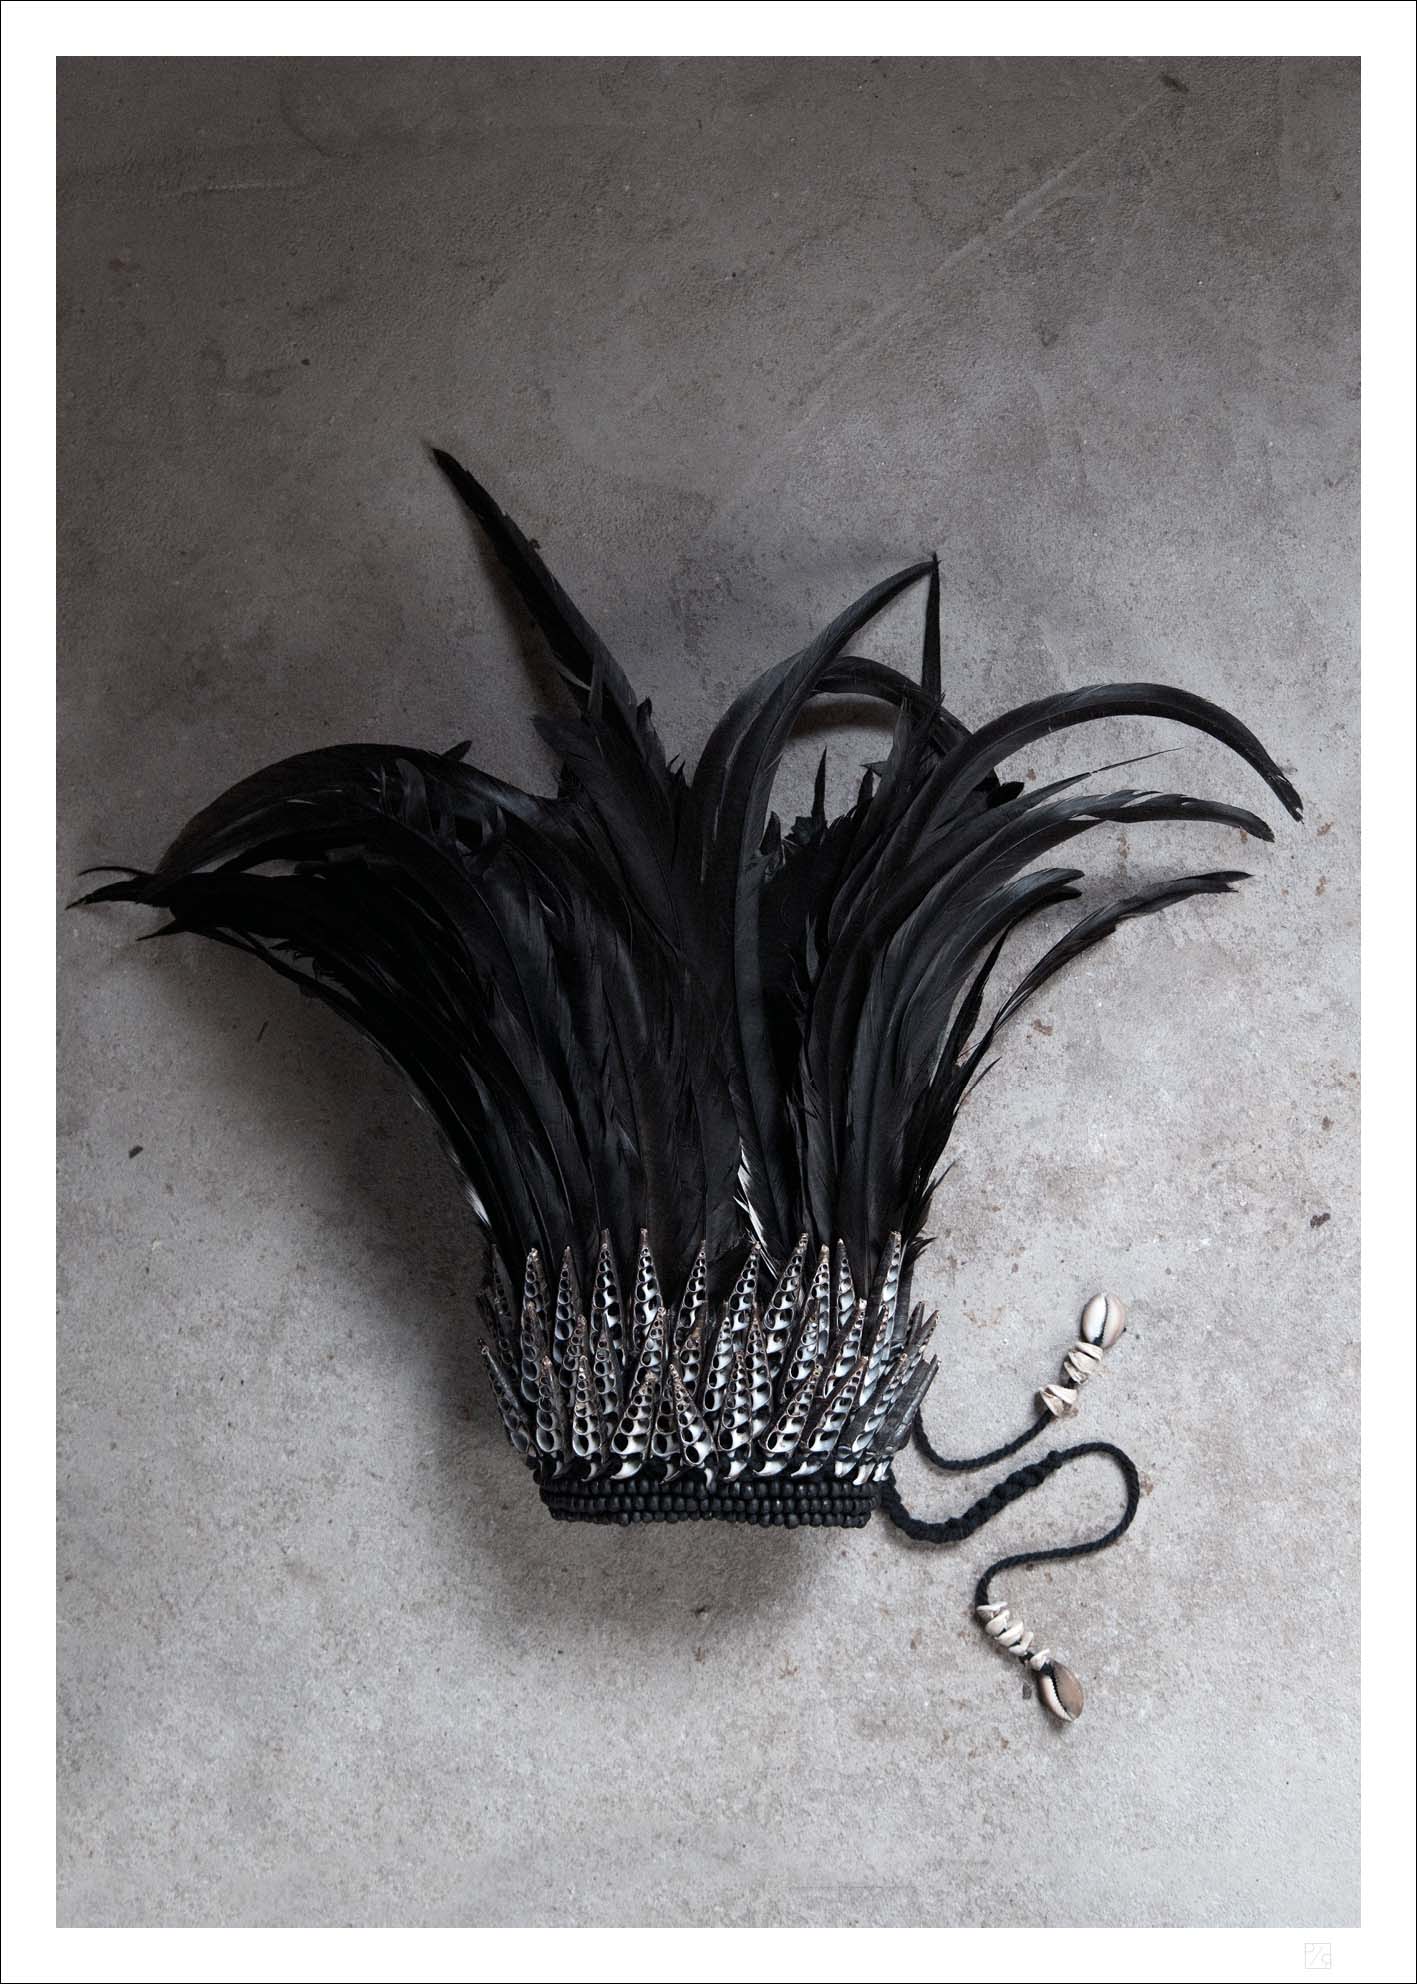 A beautiful crowd made of black feathers. Here you have our black feather crown poster